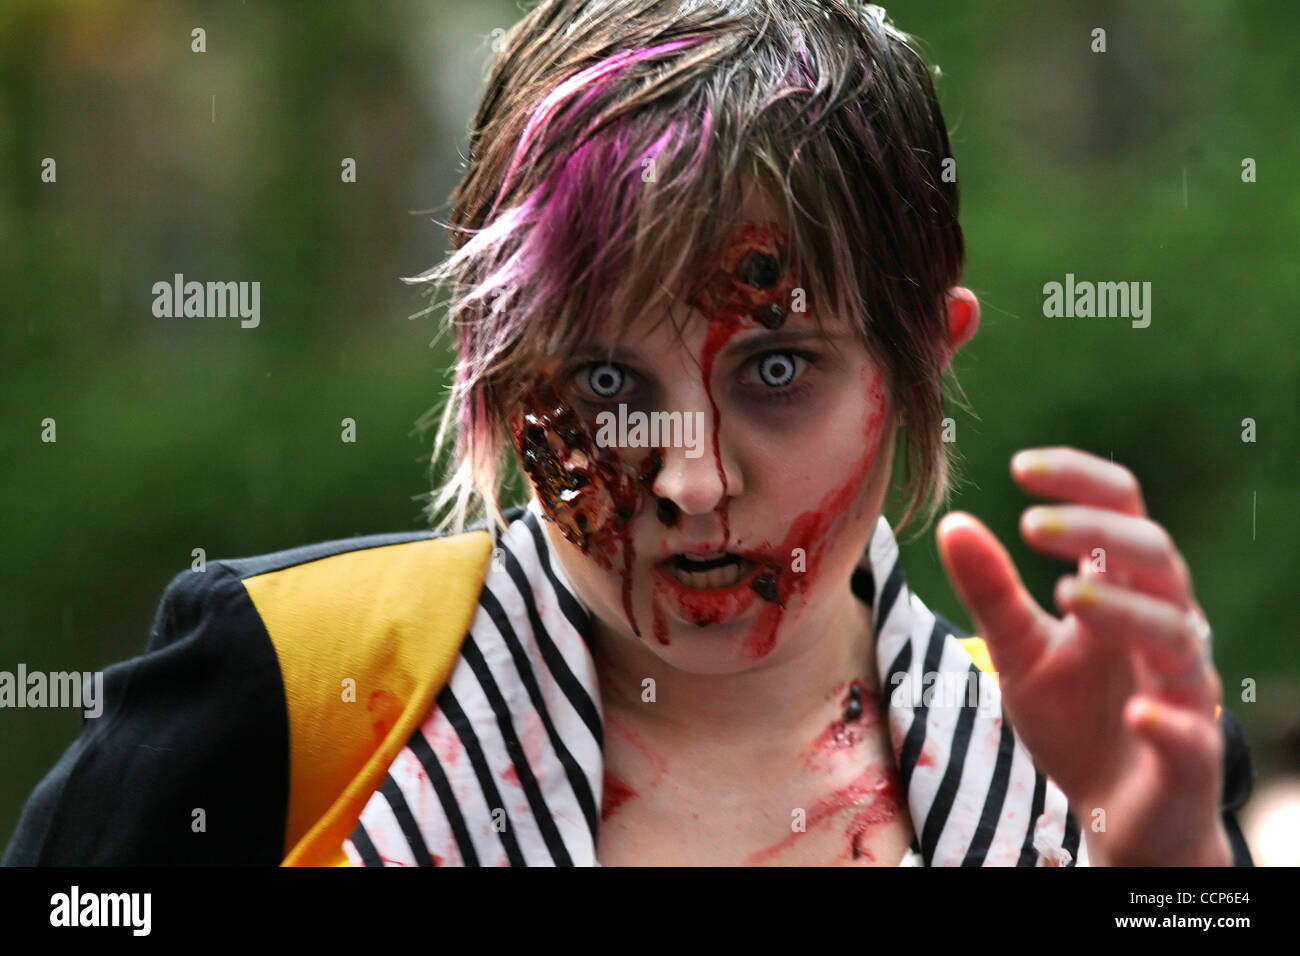 Oct. 23, 2010 - Seattle, Washington, USA - One of 278 people dressed as zombies to dance in Occidental Park to Michael Jackson's ''Thriller'' as part of the Thrill the World attempt to break the world record for largest simultaneous Thriller dance.  Groups in cities all over the world participated.  Stock Photo